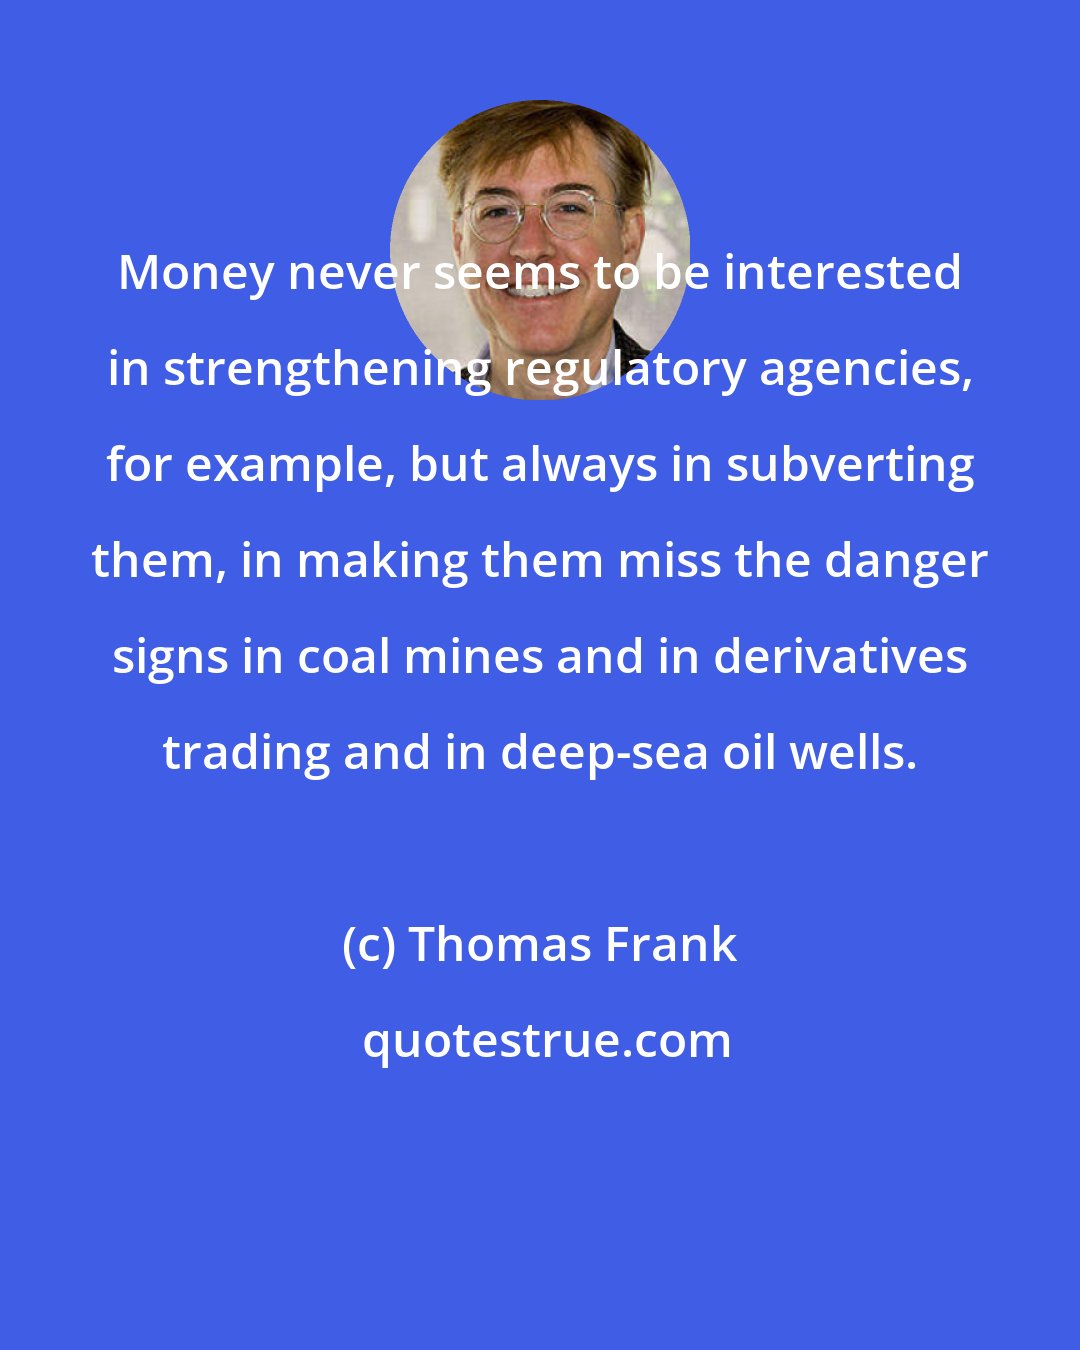 Thomas Frank: Money never seems to be interested in strengthening regulatory agencies, for example, but always in subverting them, in making them miss the danger signs in coal mines and in derivatives trading and in deep-sea oil wells.